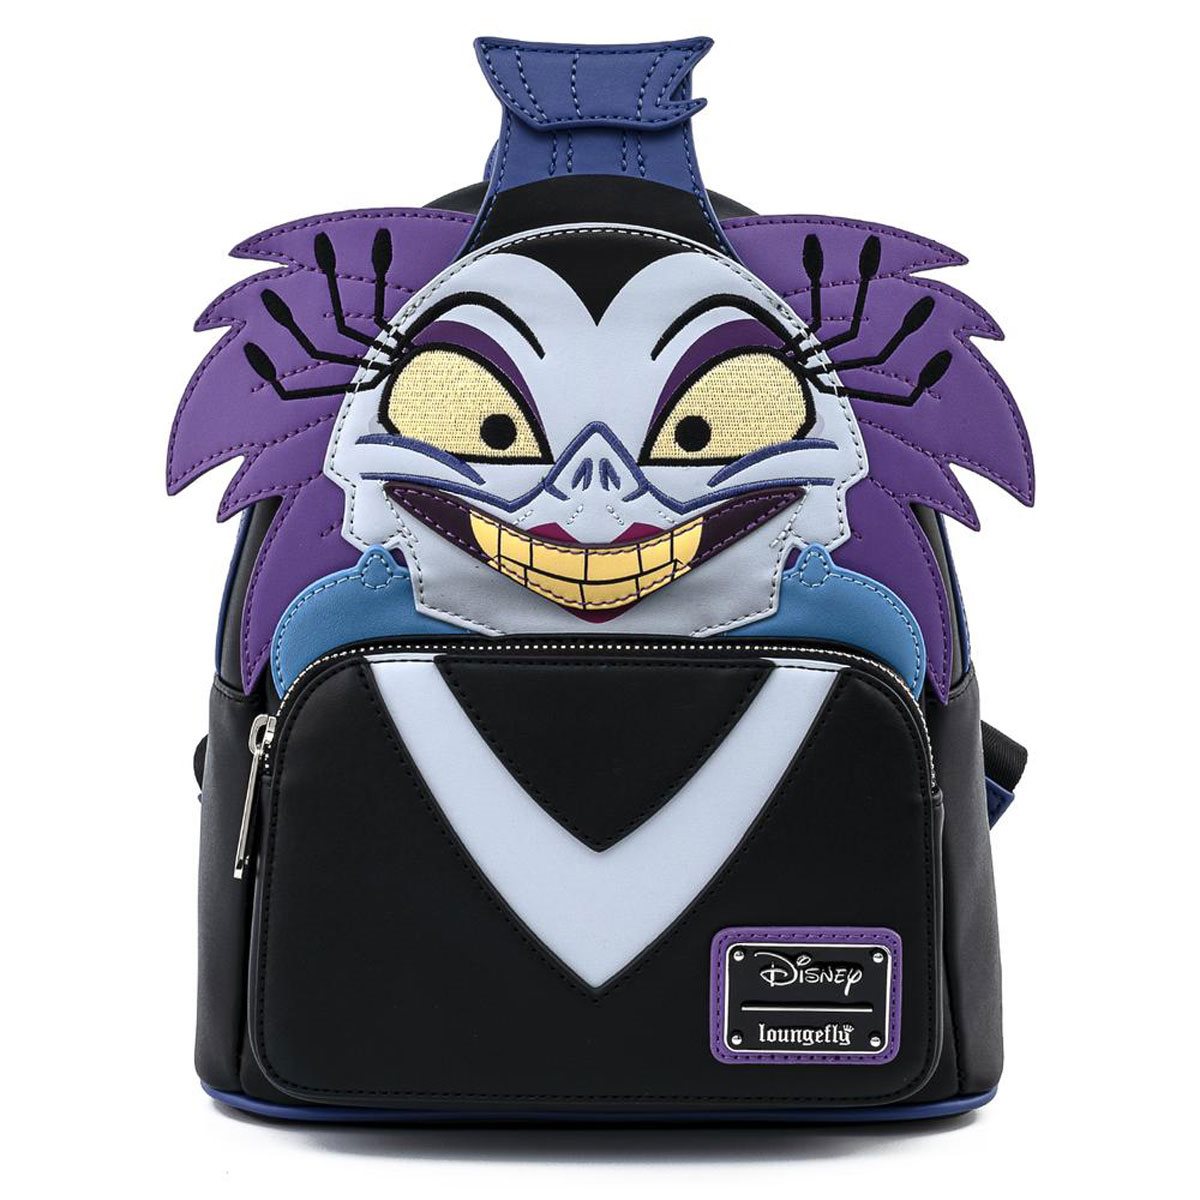 Loungefly Disney Maleficent Dragon Cosplay Mini Backpack available